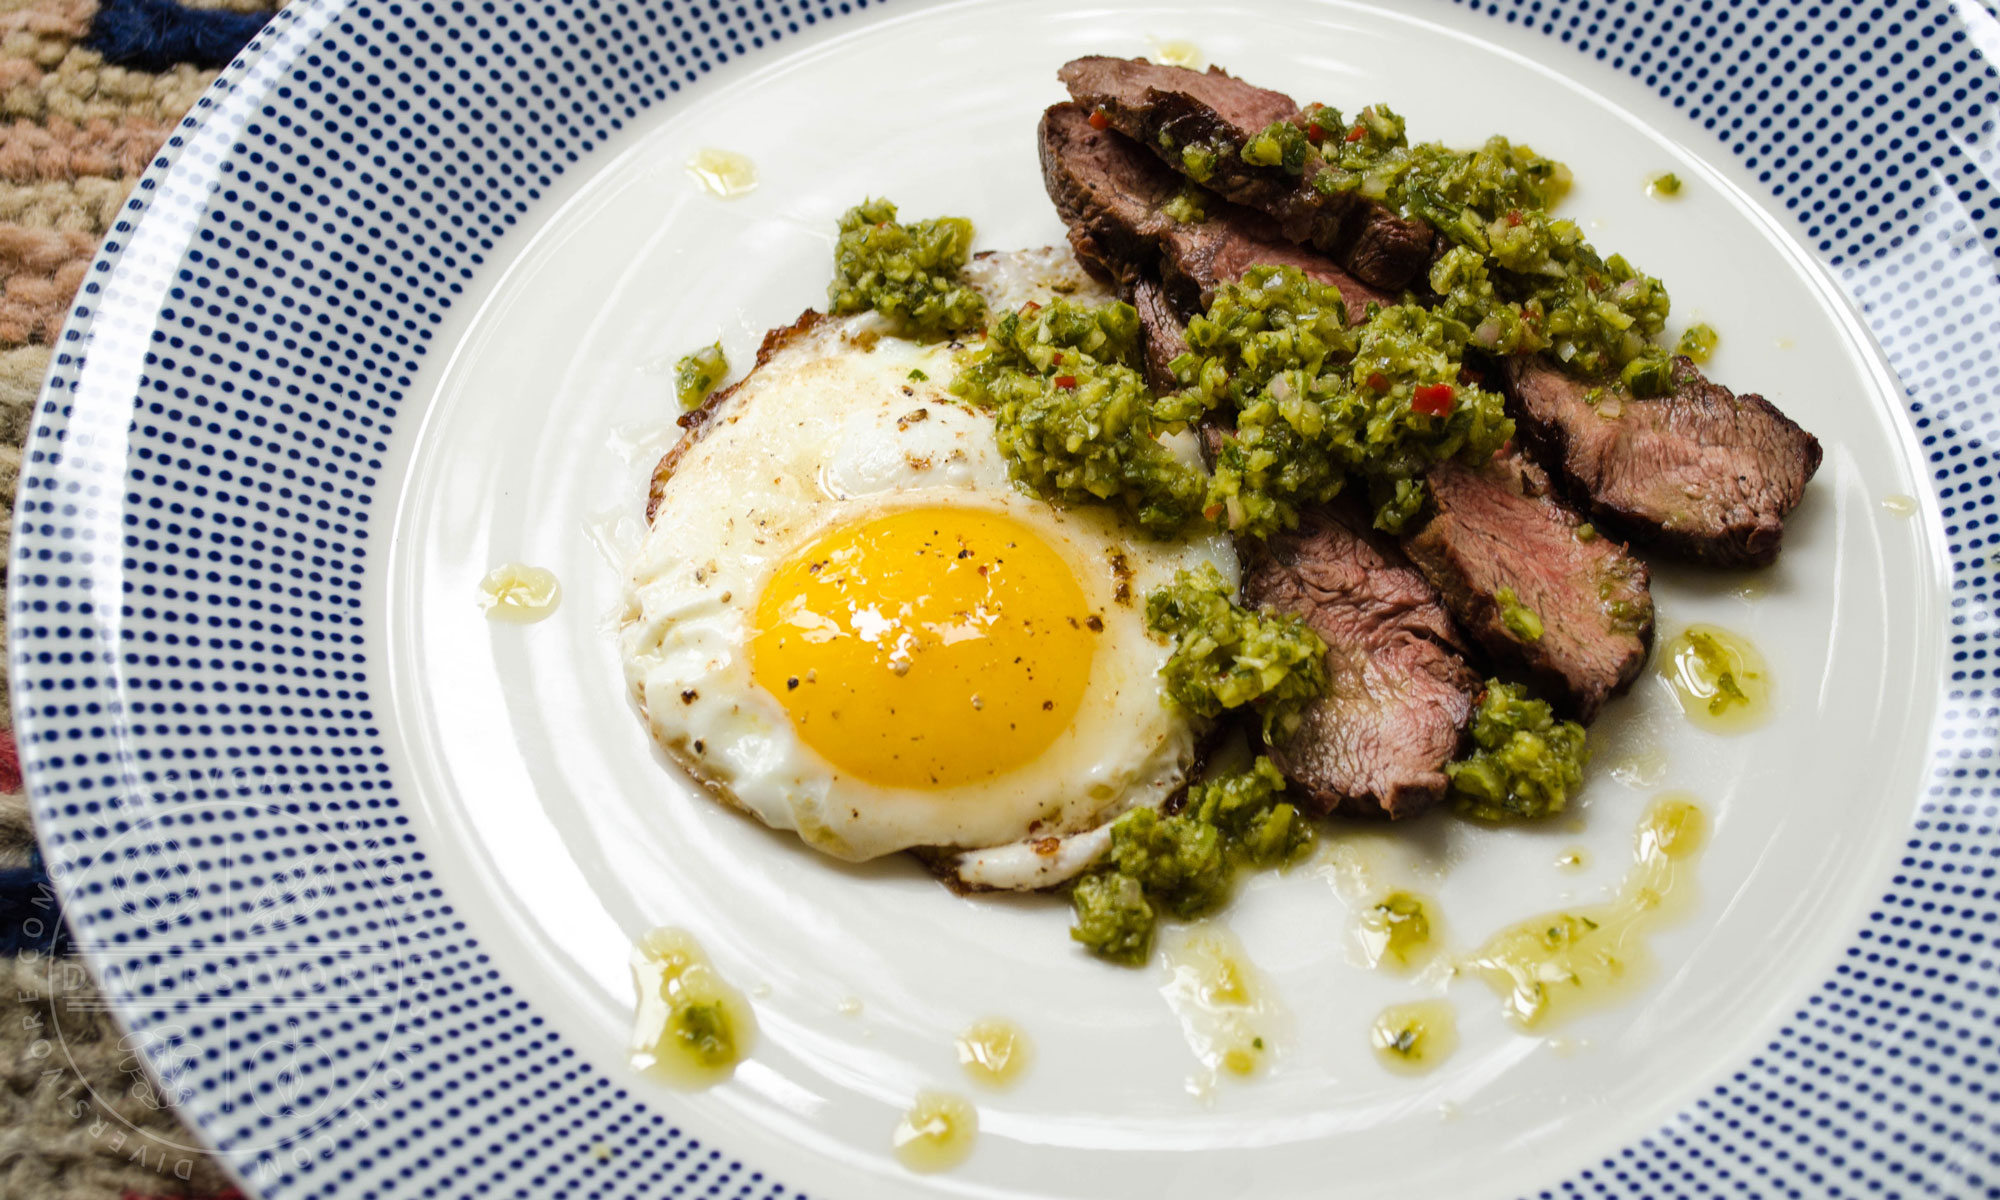 Featured image for “Garlic Scape Chimichurri”